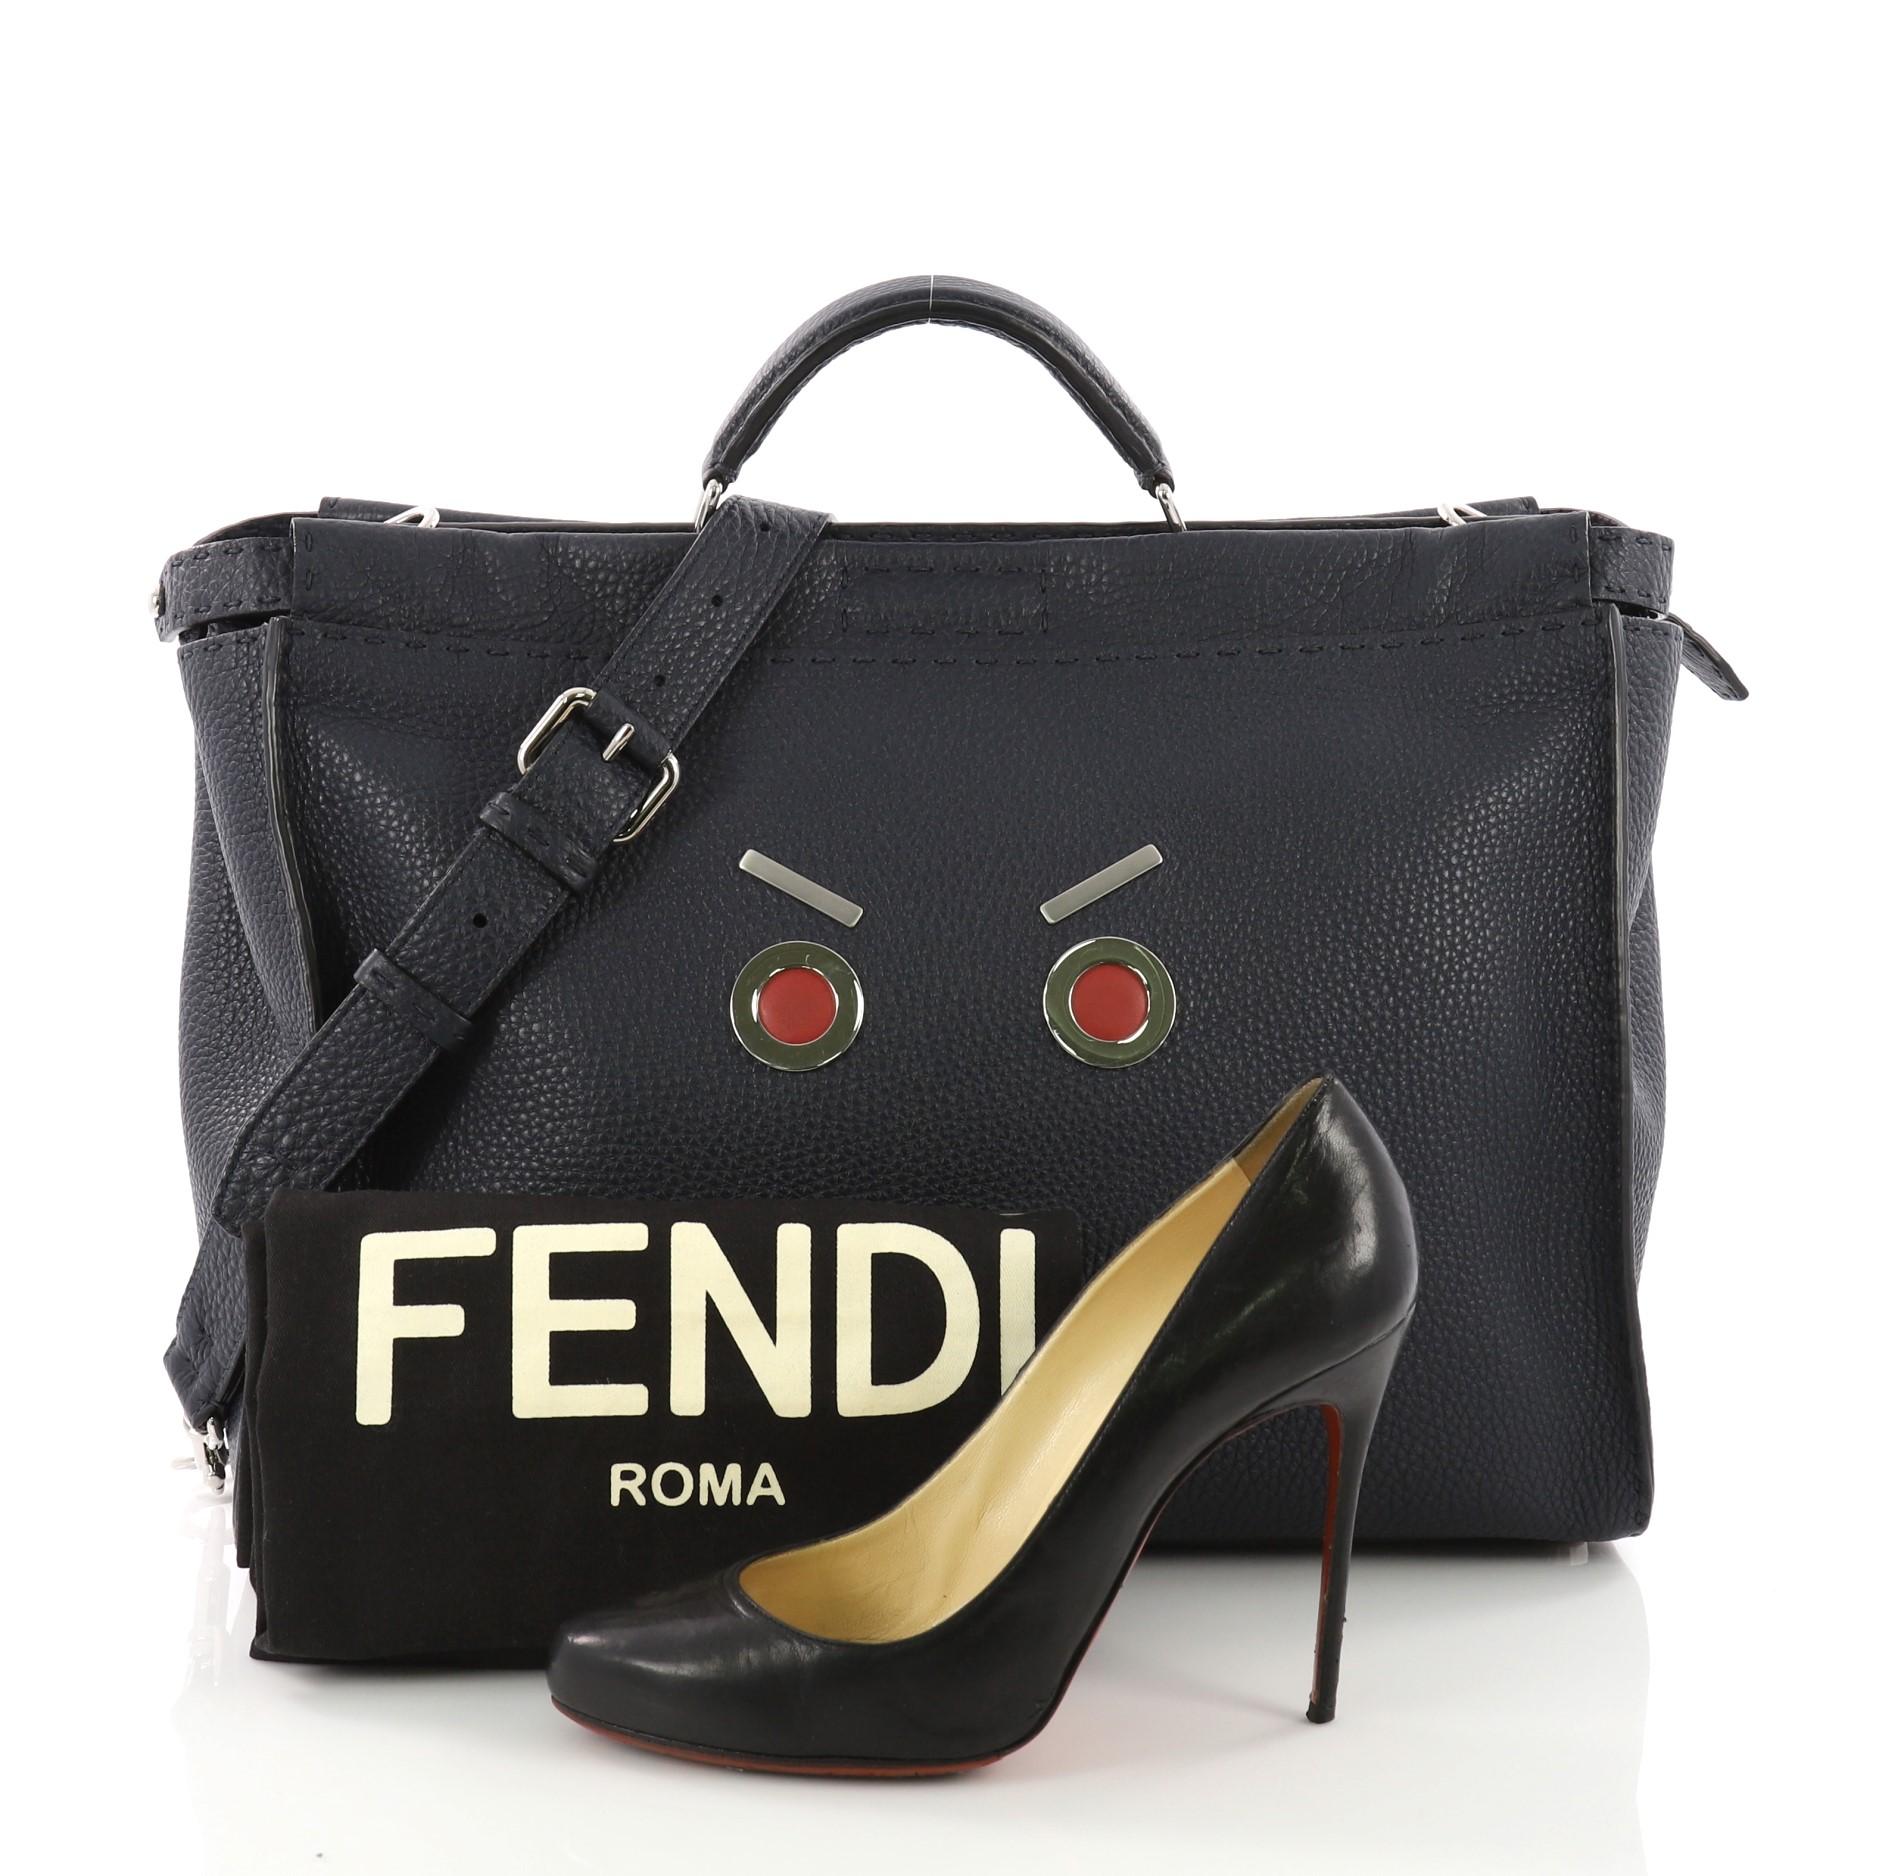 This Fendi Selleria Peekaboo Faces Handbag Leather XL, crafted in blue leather, features single a flat leather top handle, protective base studs and silver-tone hardware. Its turn-lock and zip closures opens to a blue microfiber interior with a zip